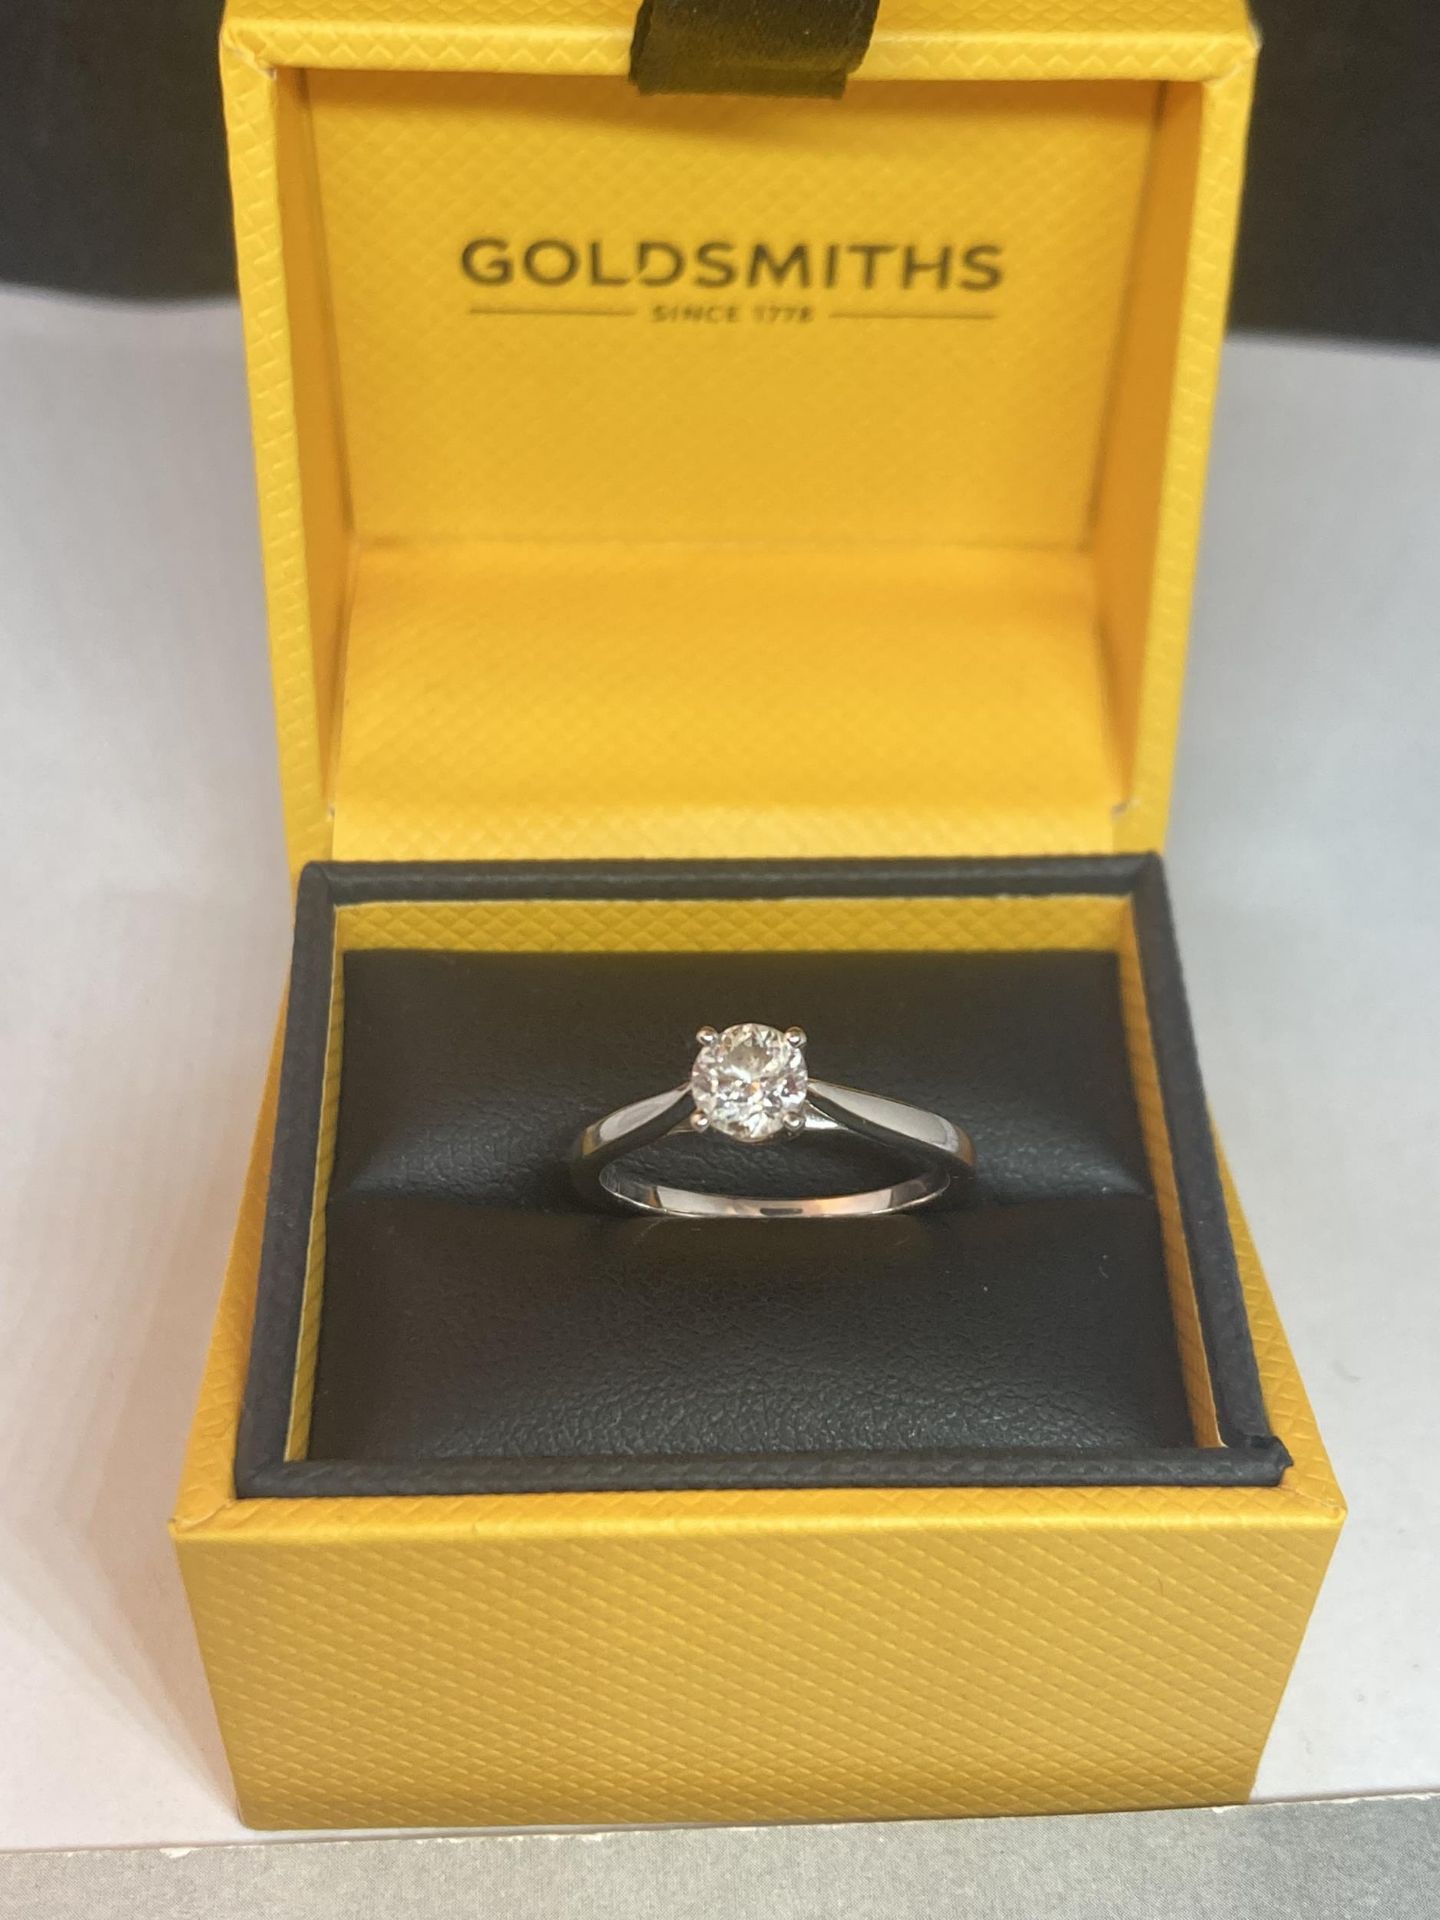 AN 18 CARAT WHITE GOLD RING WITH A 0.5 CARAT SOLITAIRE DIAMOND COMPLETE WITH GGI CERTIFICATE IN - Image 2 of 7